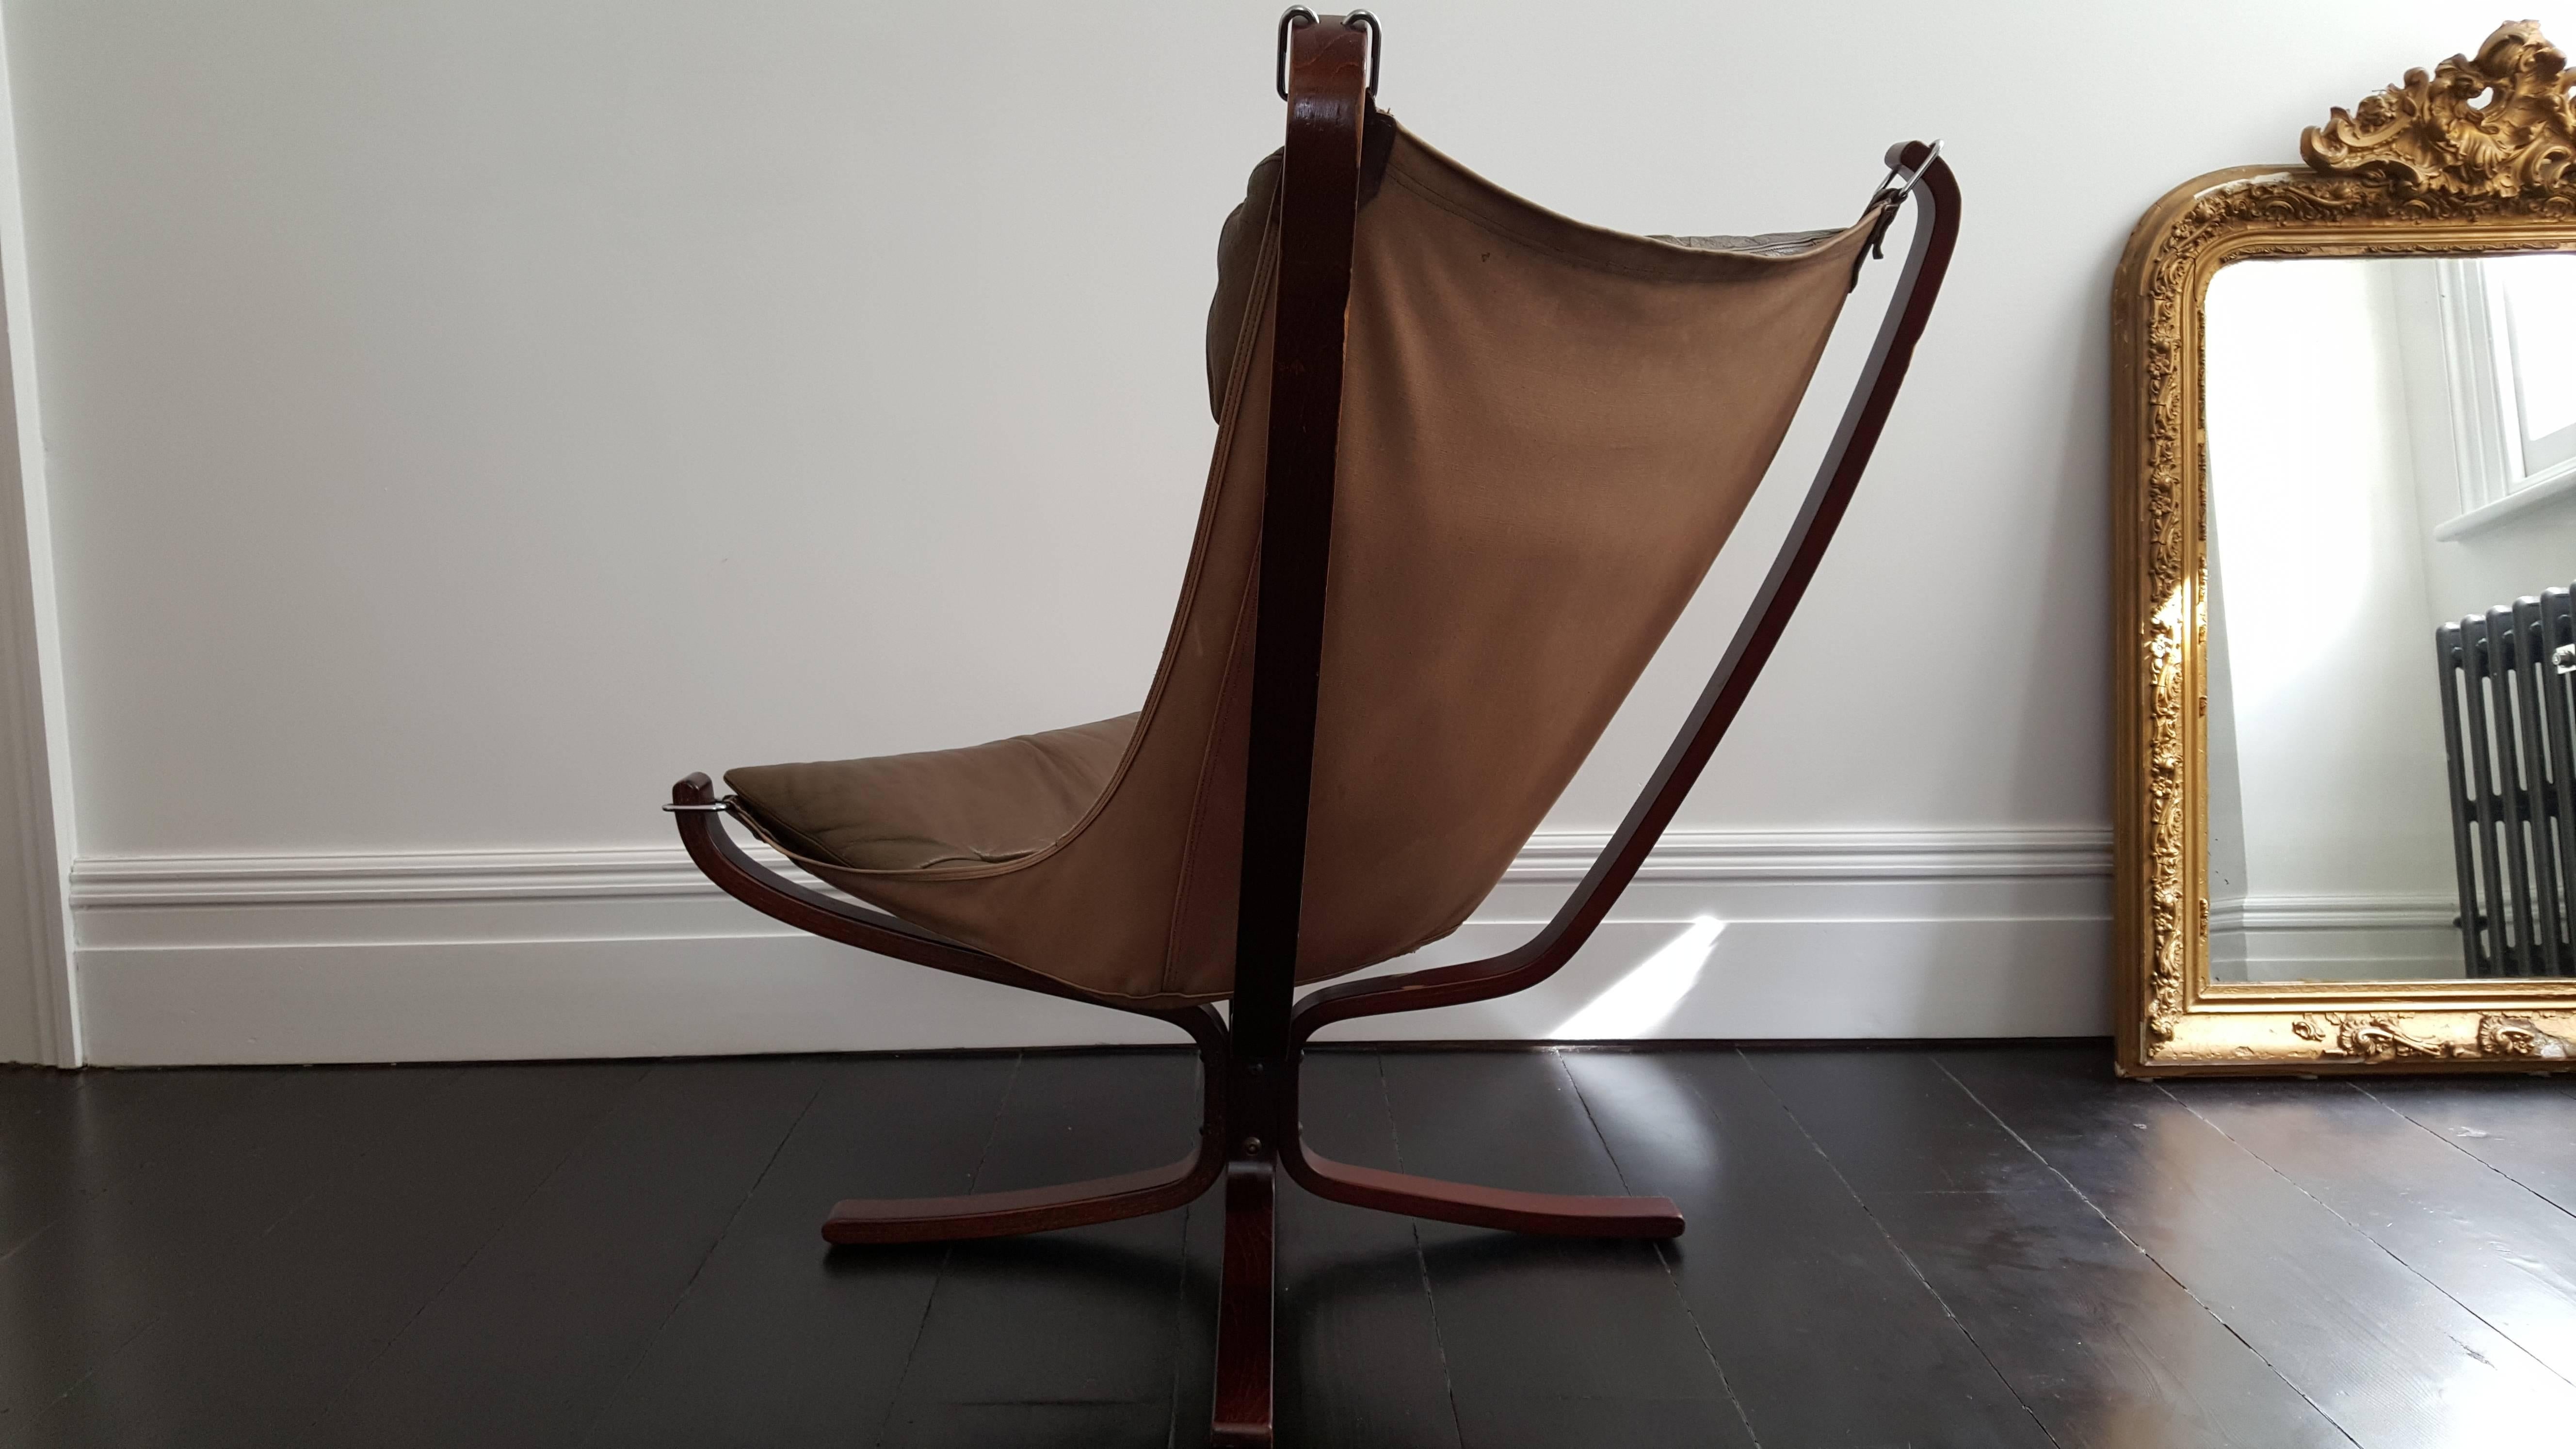 Vintage 1970s Sigurd Ressell Designed High-Backed X-Framed Falcon Chair In Good Condition In London Road, Baldock, Hertfordshire